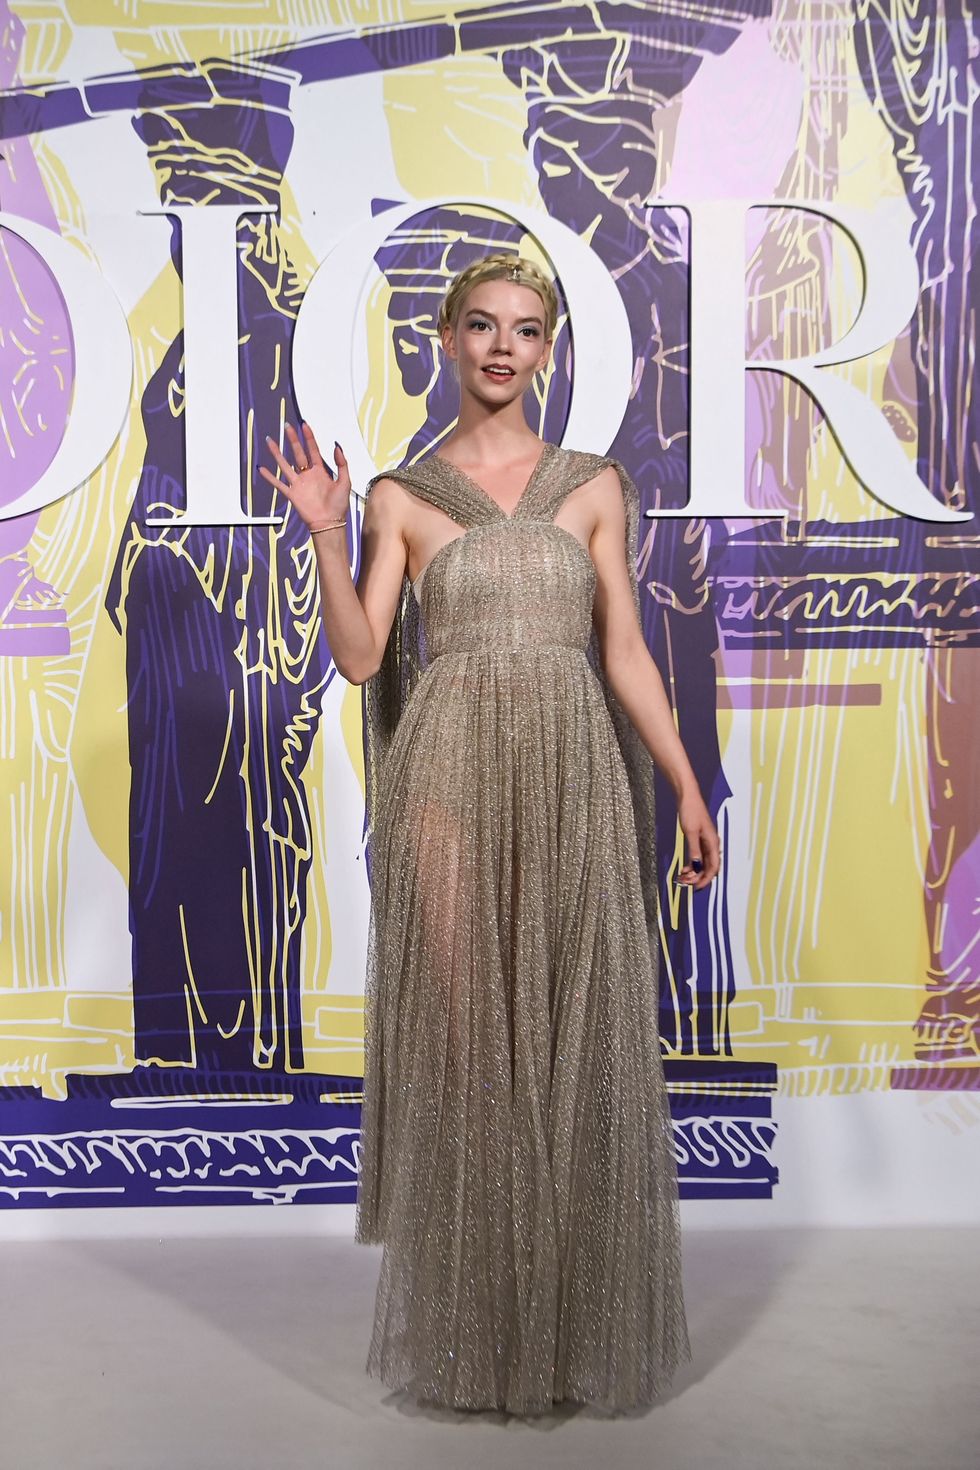 us born argentine british actress and model anya taylor joy poses during the photocall before the 2022 dior croisiere cruise fashion show, at the panathenaic stadium, in athens, on june 17, 2021 photo by aris messinis  afp photo by aris messinisafp via getty images